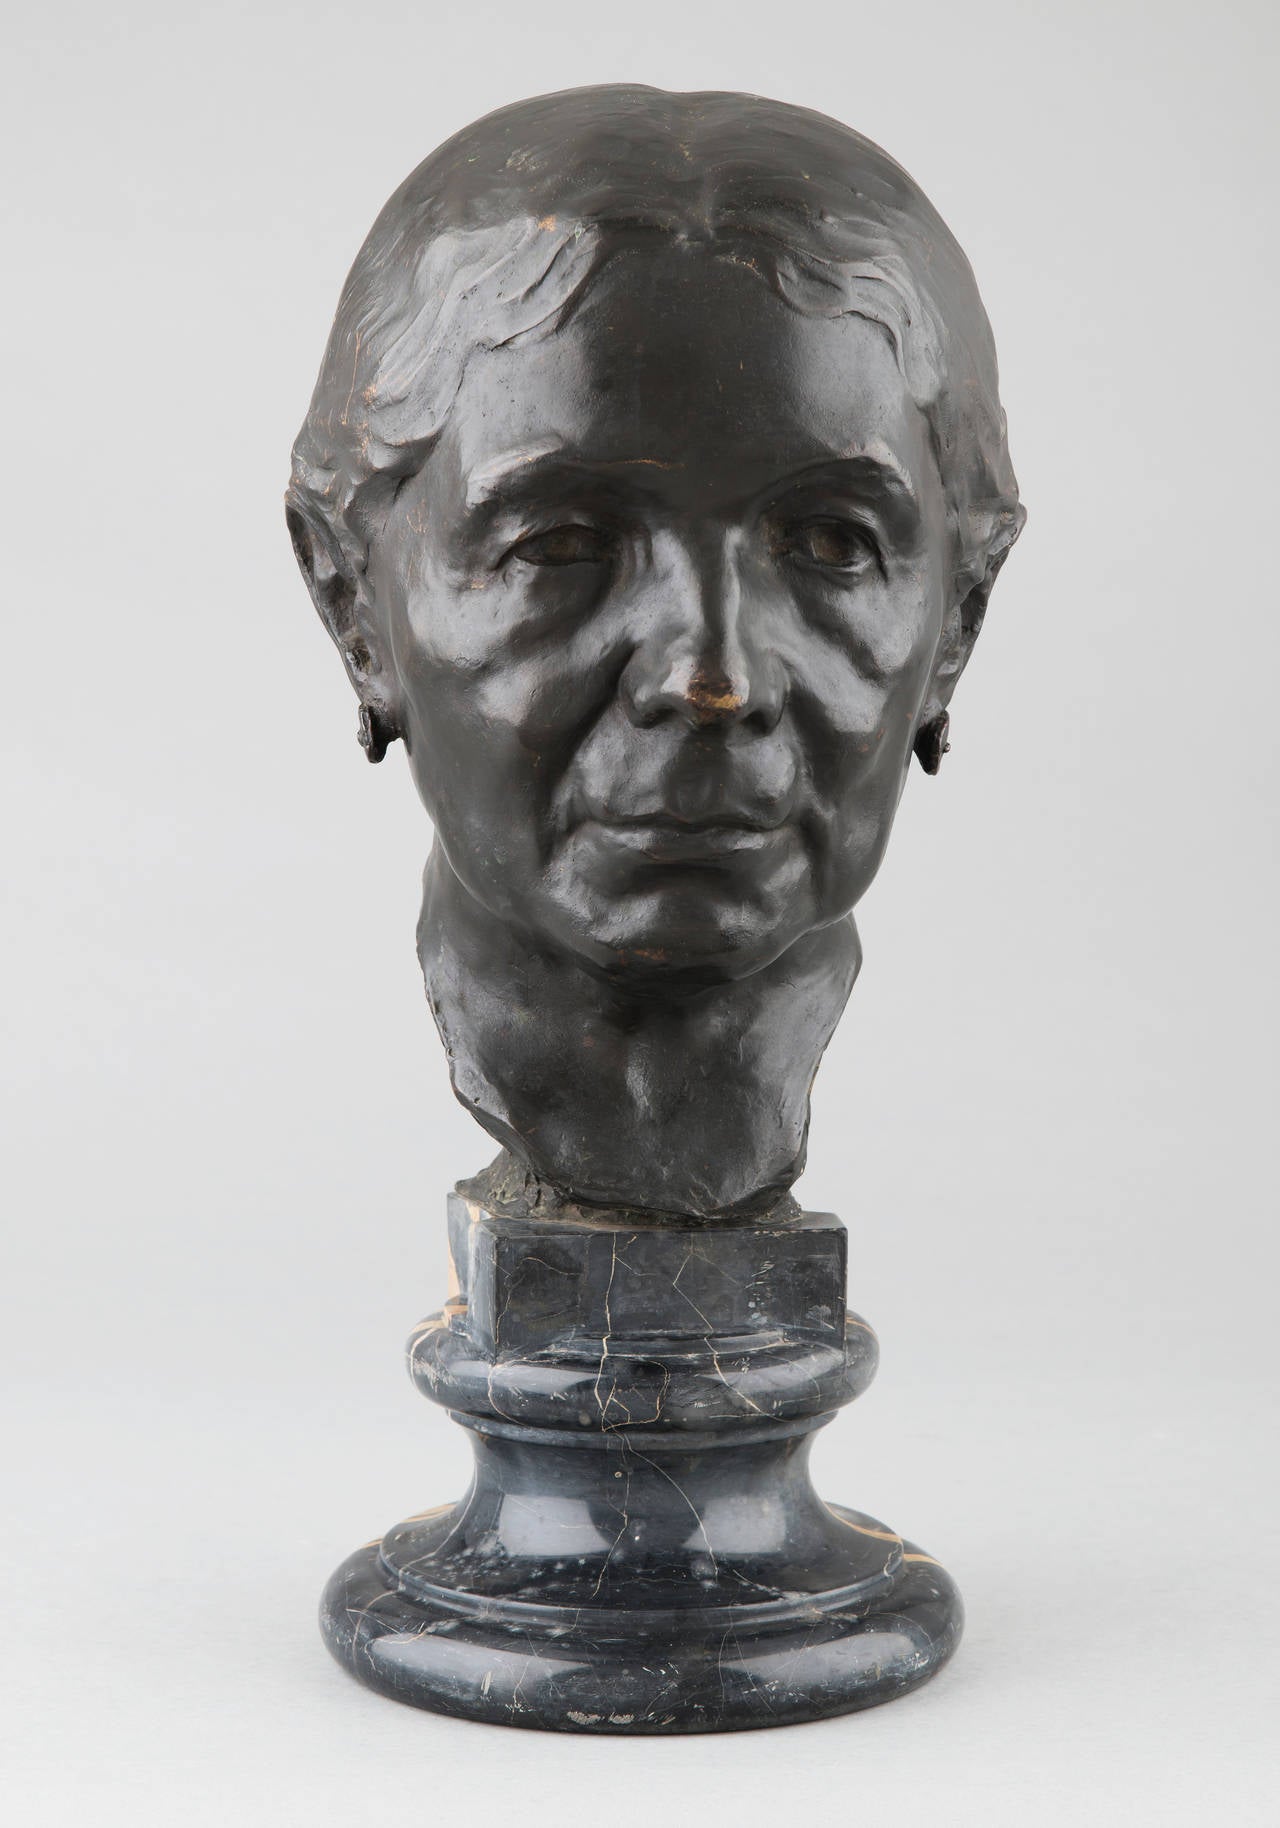 Jo Davidson
(1883-1952)

Portrait of a lady
Genuine bronze with its original dark patina.
Raised on a stepped Portor marble base.

signed 'Davidson' and dated '1906'
with the foundry mark for 'Roman bronze works N.Y.'
U.S.A.

This